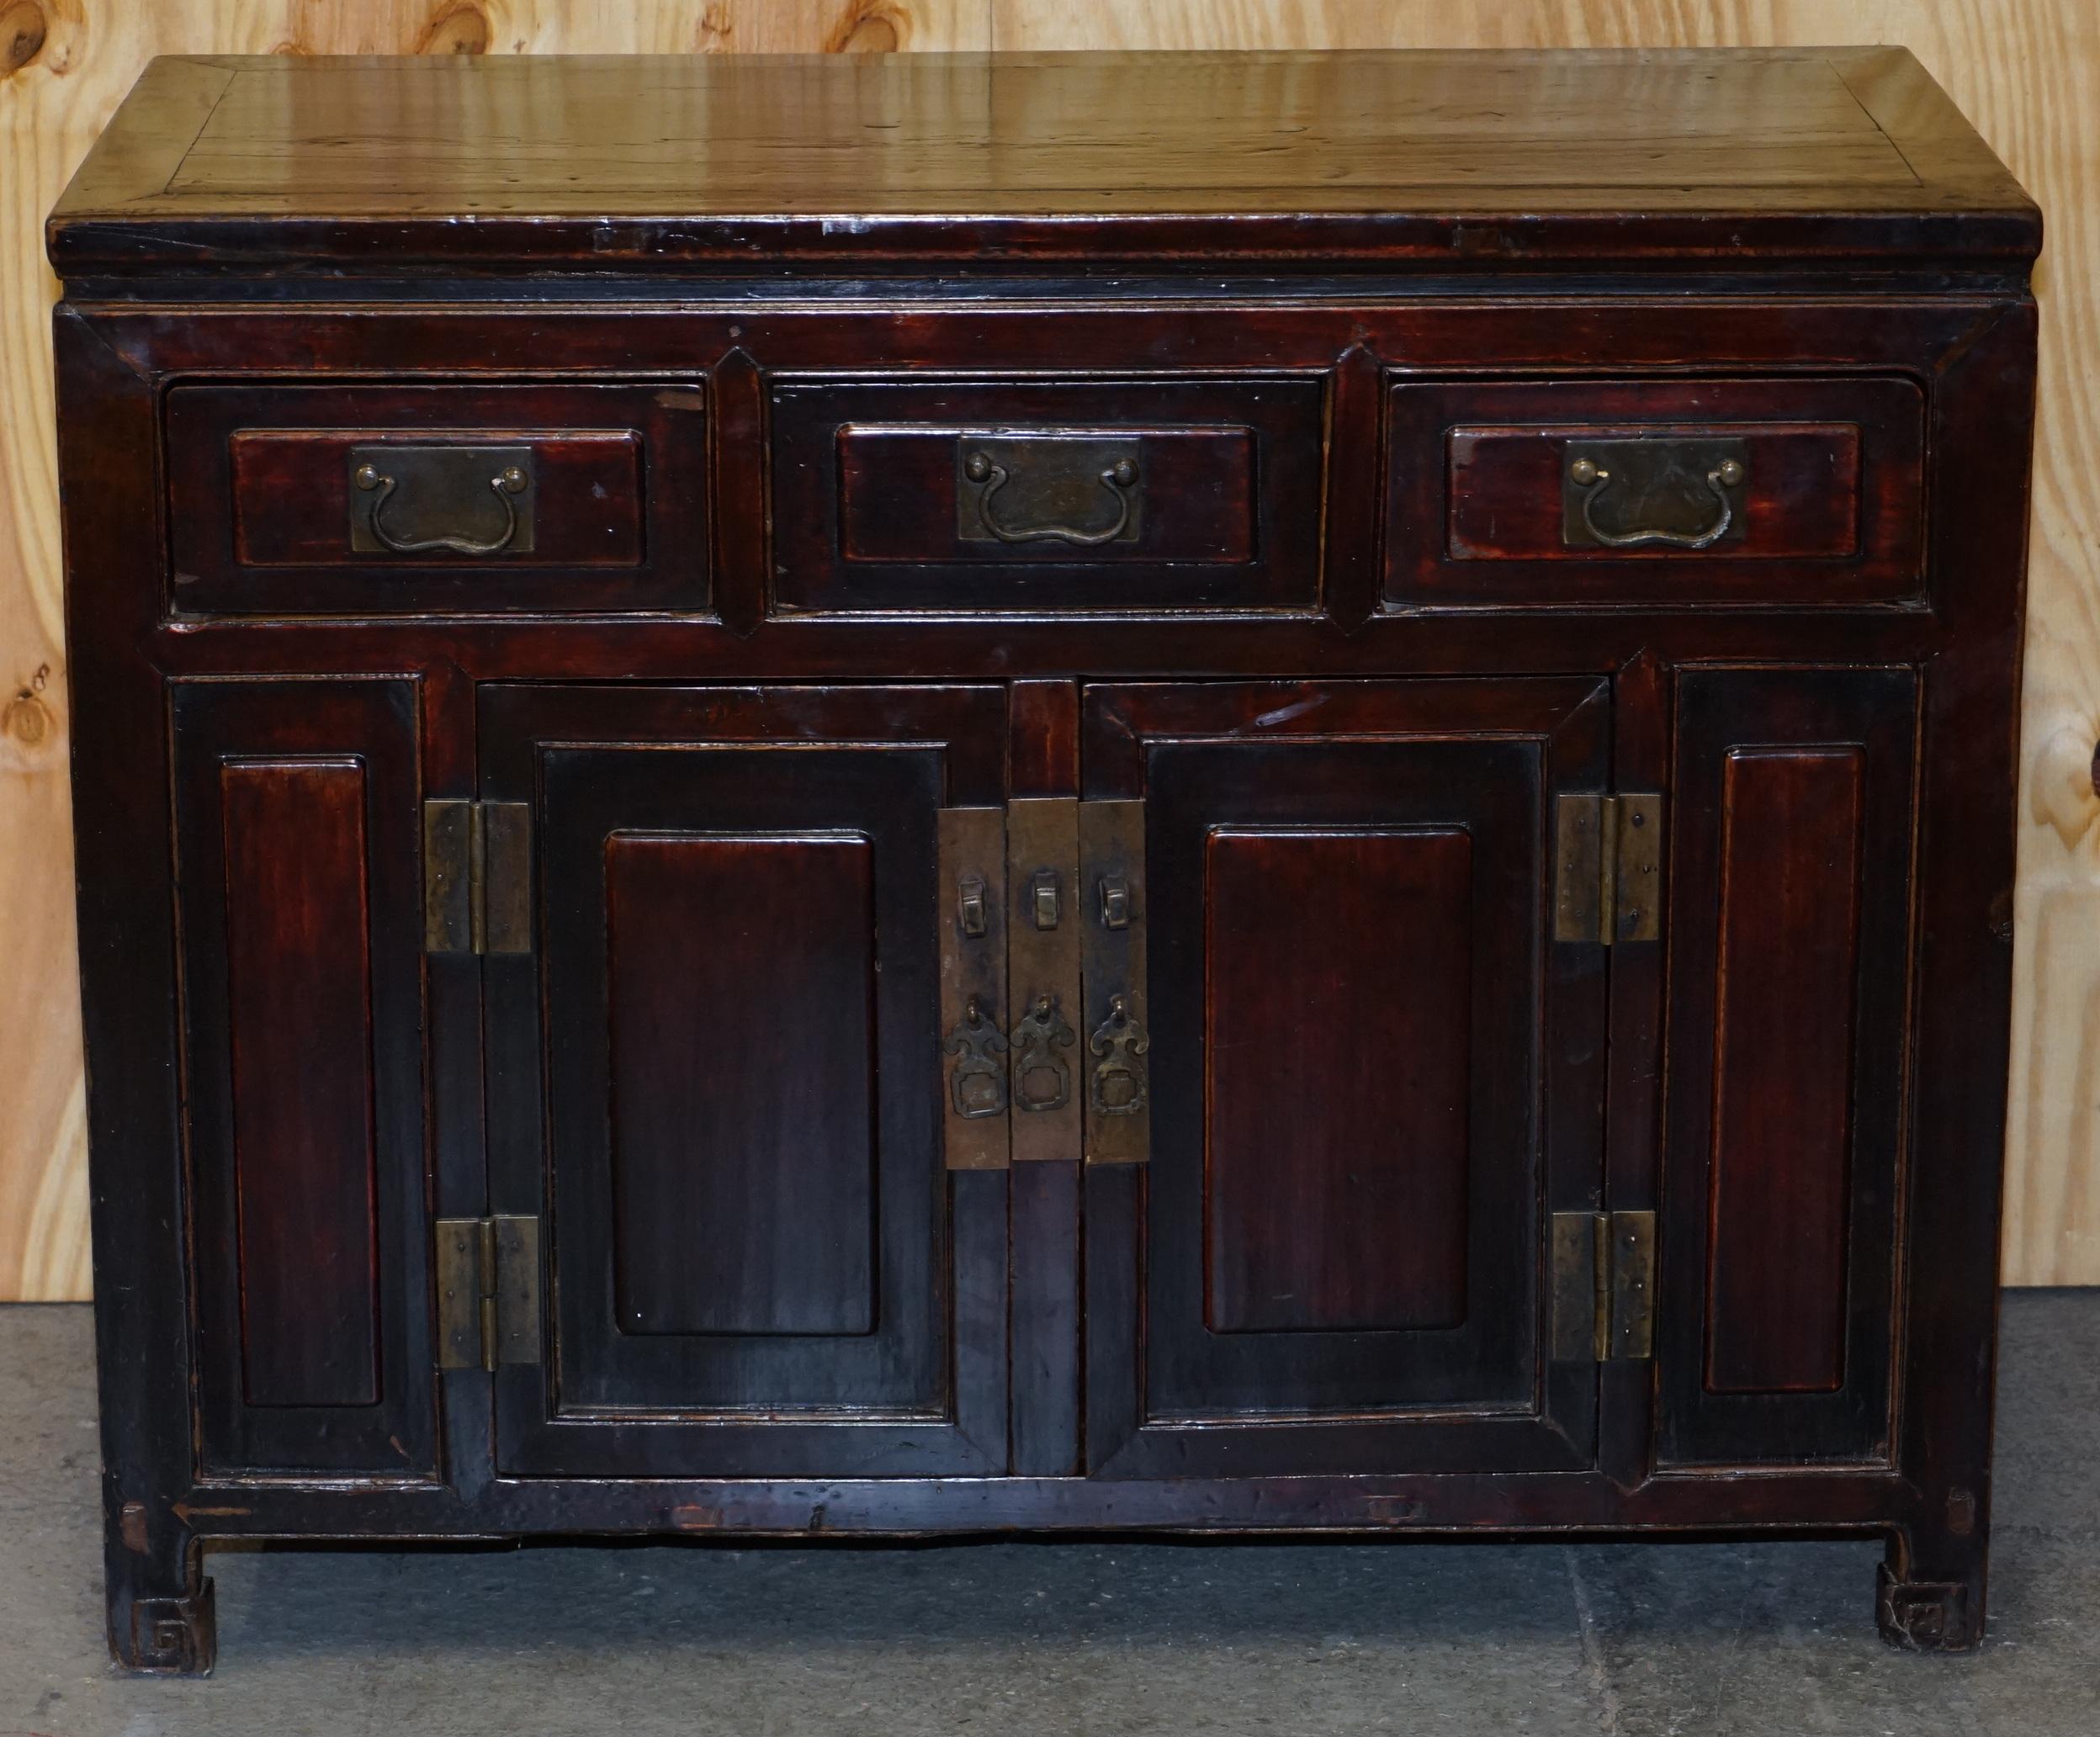 We are delighted to offer for sale this stunning vintage Chinese cabinet with original lacquered finish 

A very good looking and well made piece, its highly decorative and very functional offering huge amounts of storage space

This piece looks